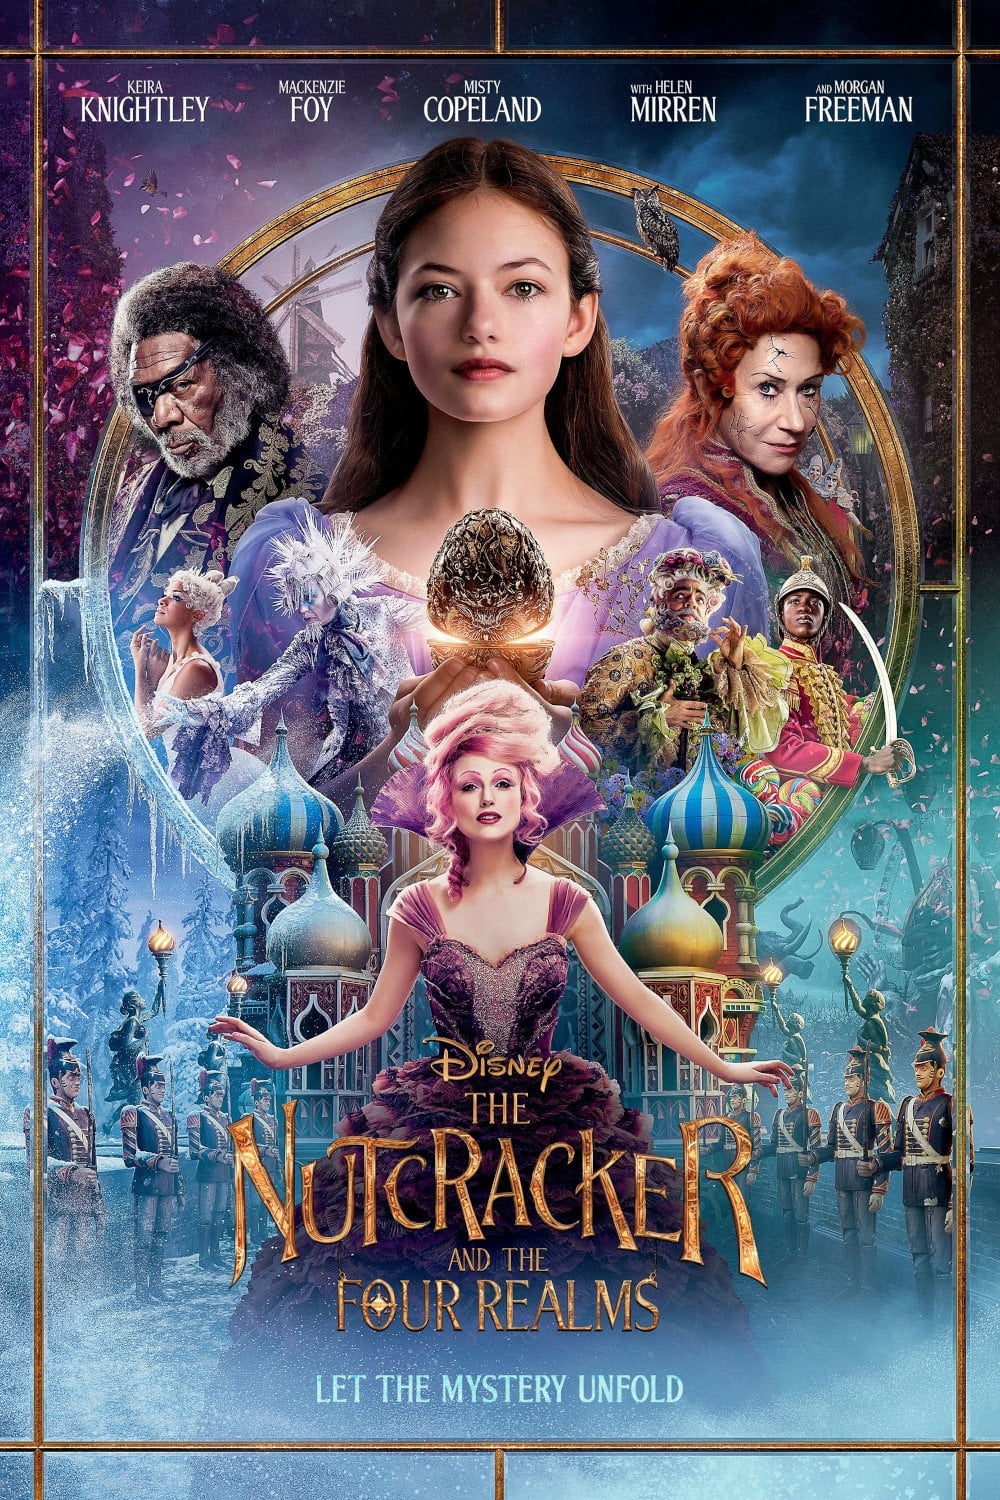 EN - The Nutcracker And The Four Realms (2018)